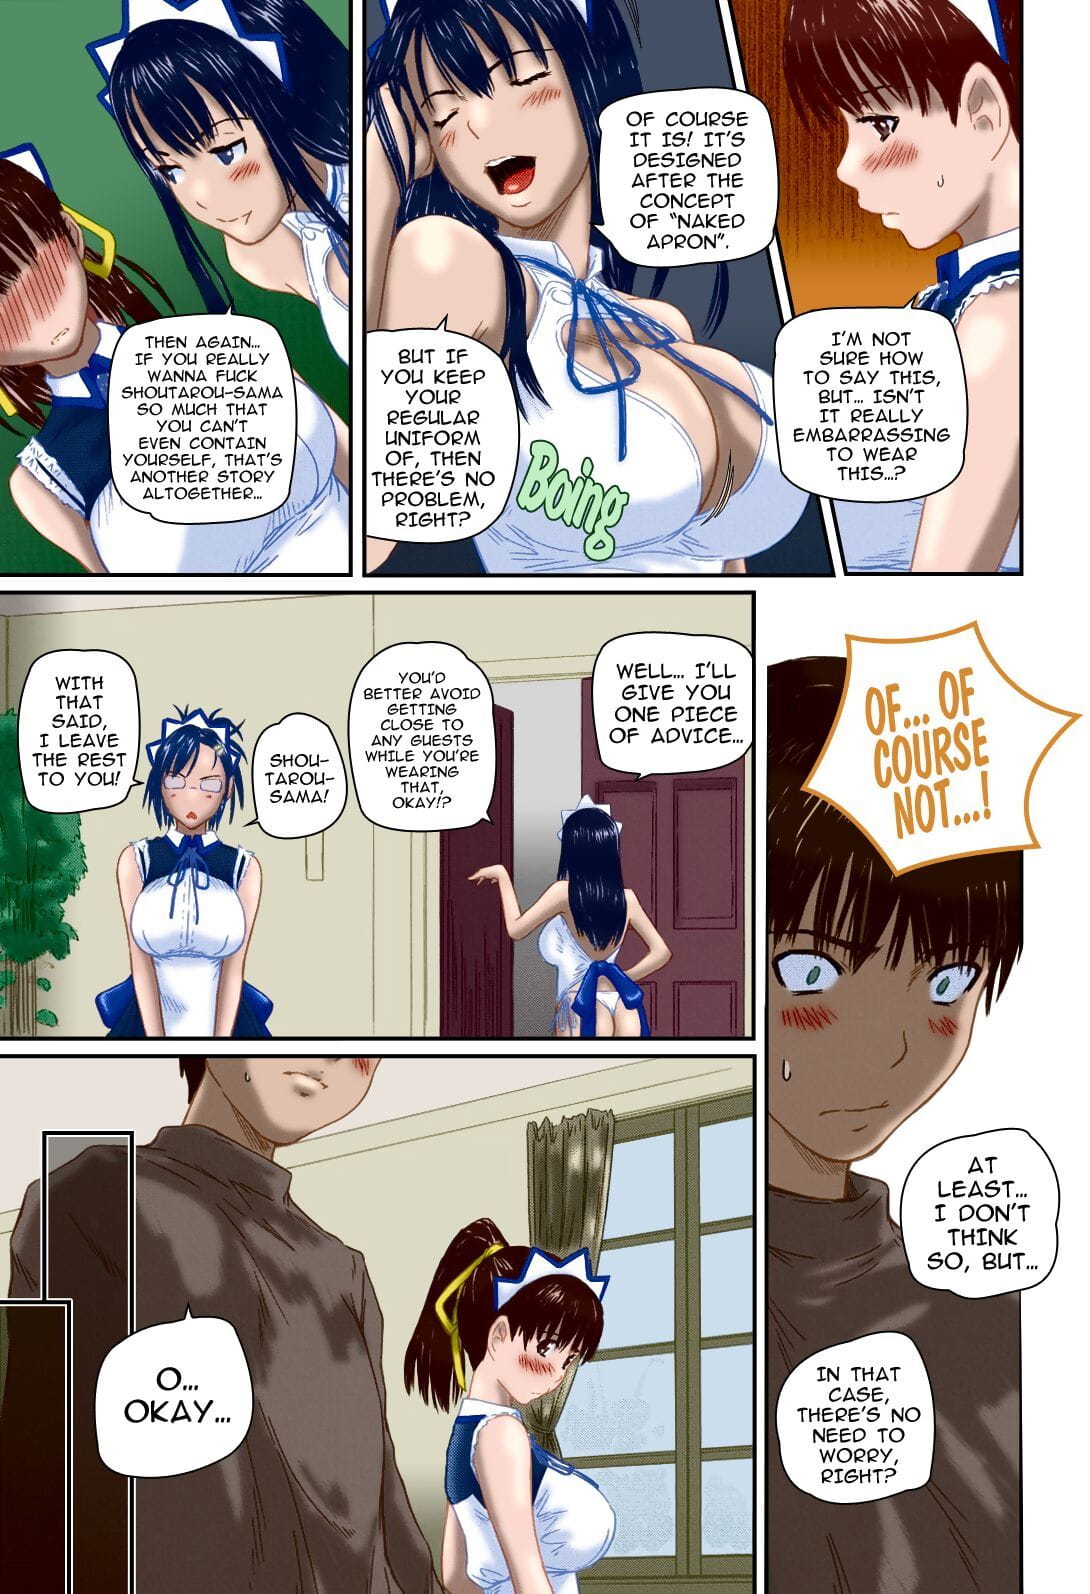 Mai Favori redessiner Ch 1-4 Wip - PARTIE 2 page 1